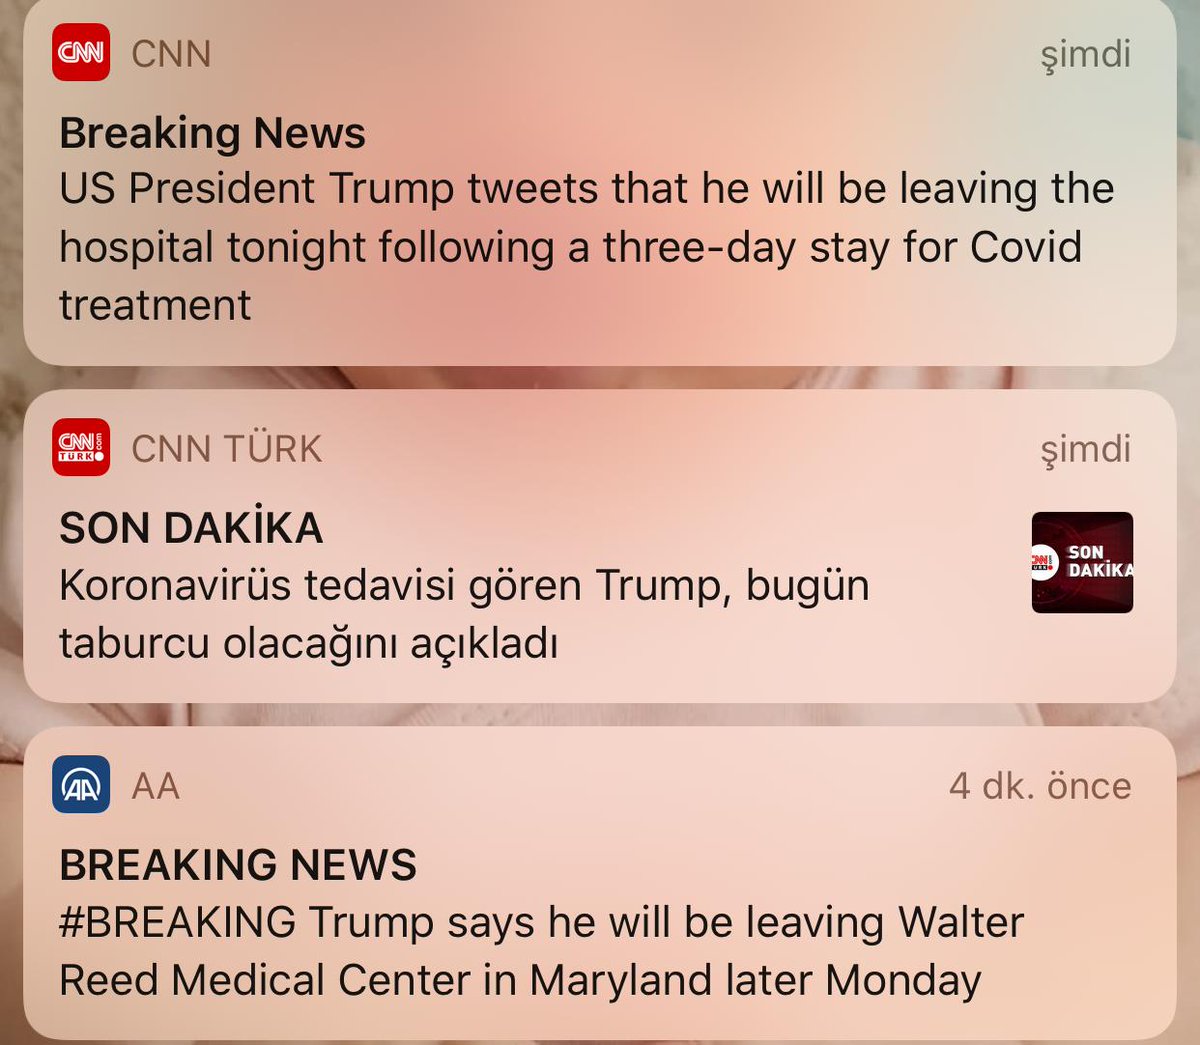 Beating #CNN in #BREAKINGNEWS #flash with 4 minutes
Thank you #anadoluagency #englishdesk 

#BREAKING #Trump says he will be leaving Walter Reed Medical Center in Maryland later Monday

#coronavirus #COVID19